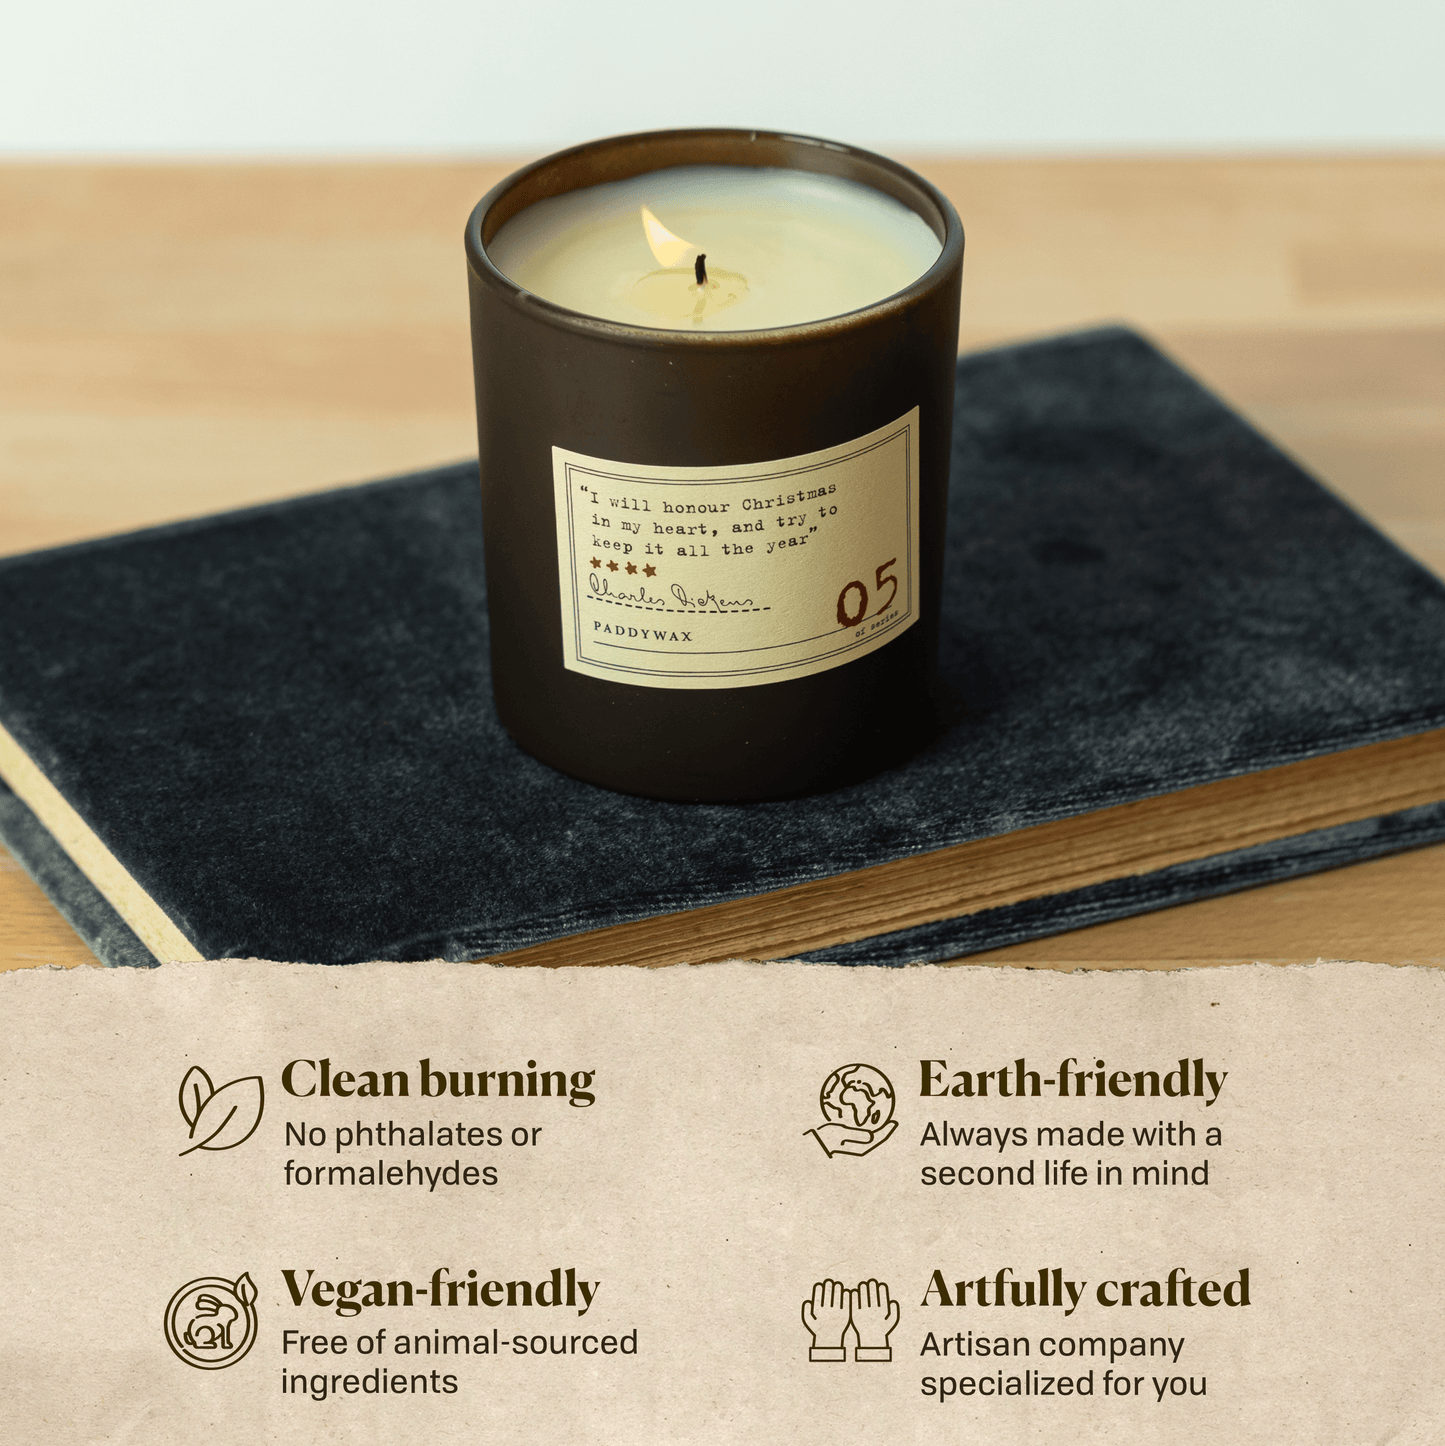 A photo of the Charles Dickens candle sitting on a book. Clean burning: no phthalates or formaldehydes. Earth-friendly: Always made with a second life in mind. Vegan-friendly: Free of animal sourced ingredients. Artfully crafted: Artisan company specialized for you.